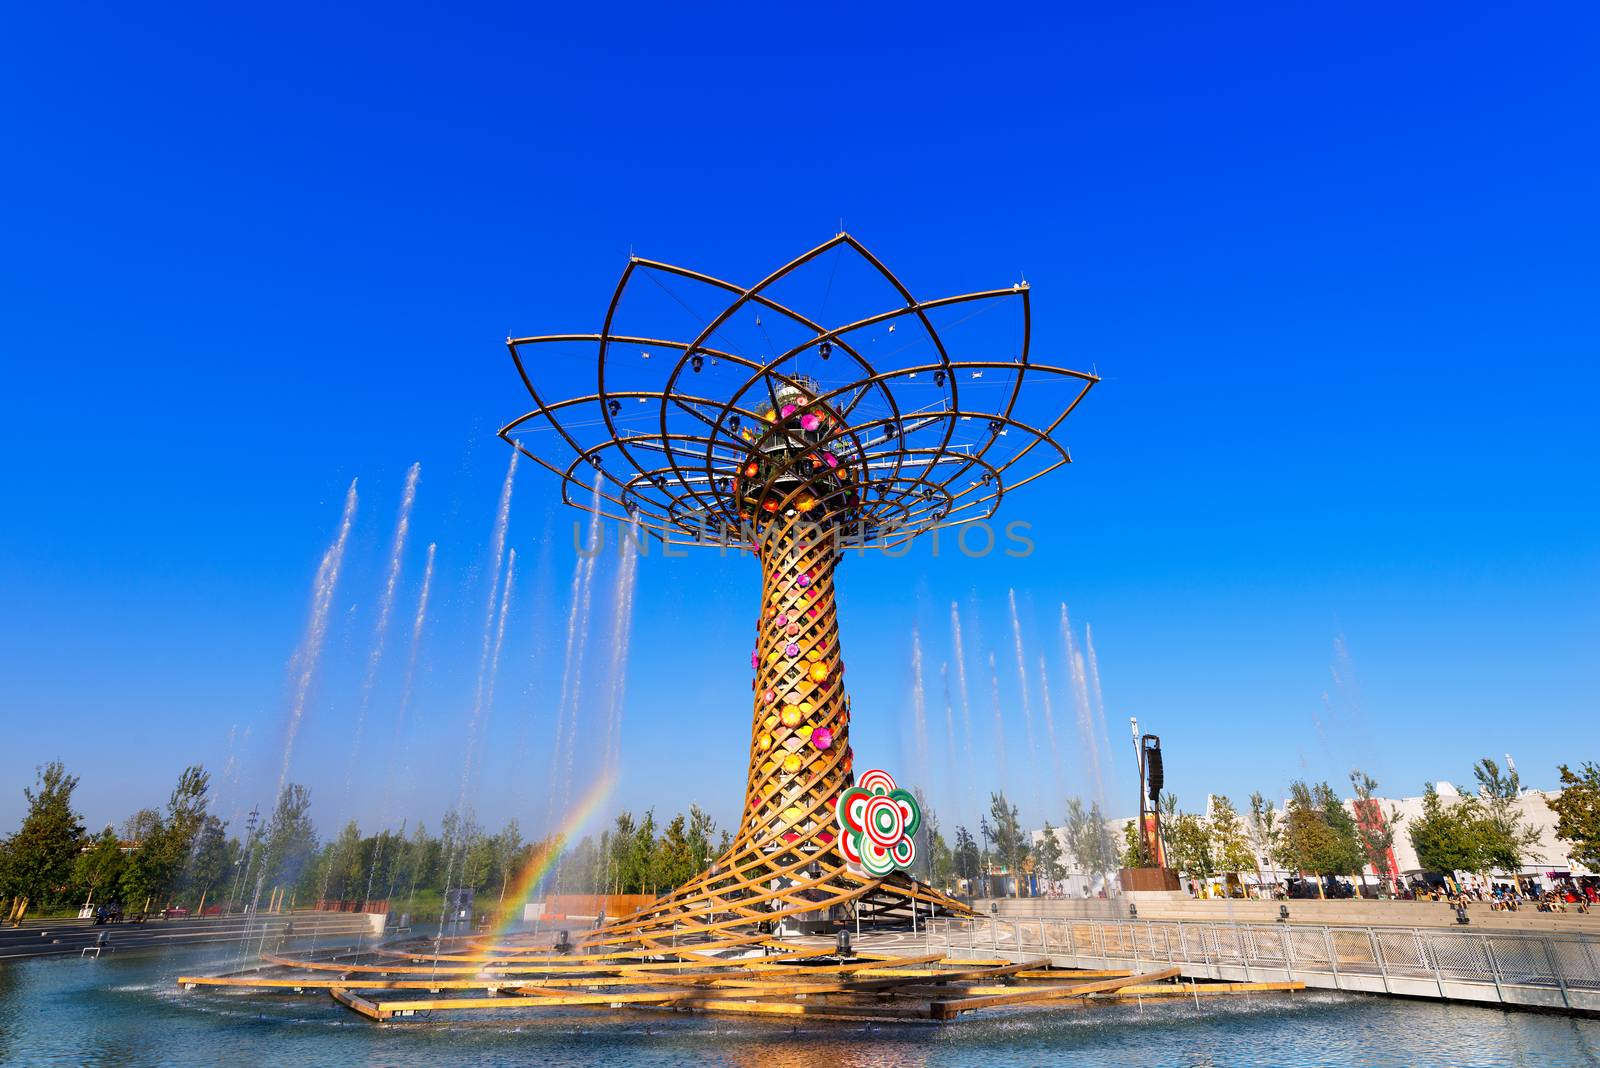 MILAN, ITALY - AUGUST 31, 2015: The tree of life during water play show at Expo Milano 2015, universal exposition on the theme of food, in Milan, Lombardy, Italy, Europe